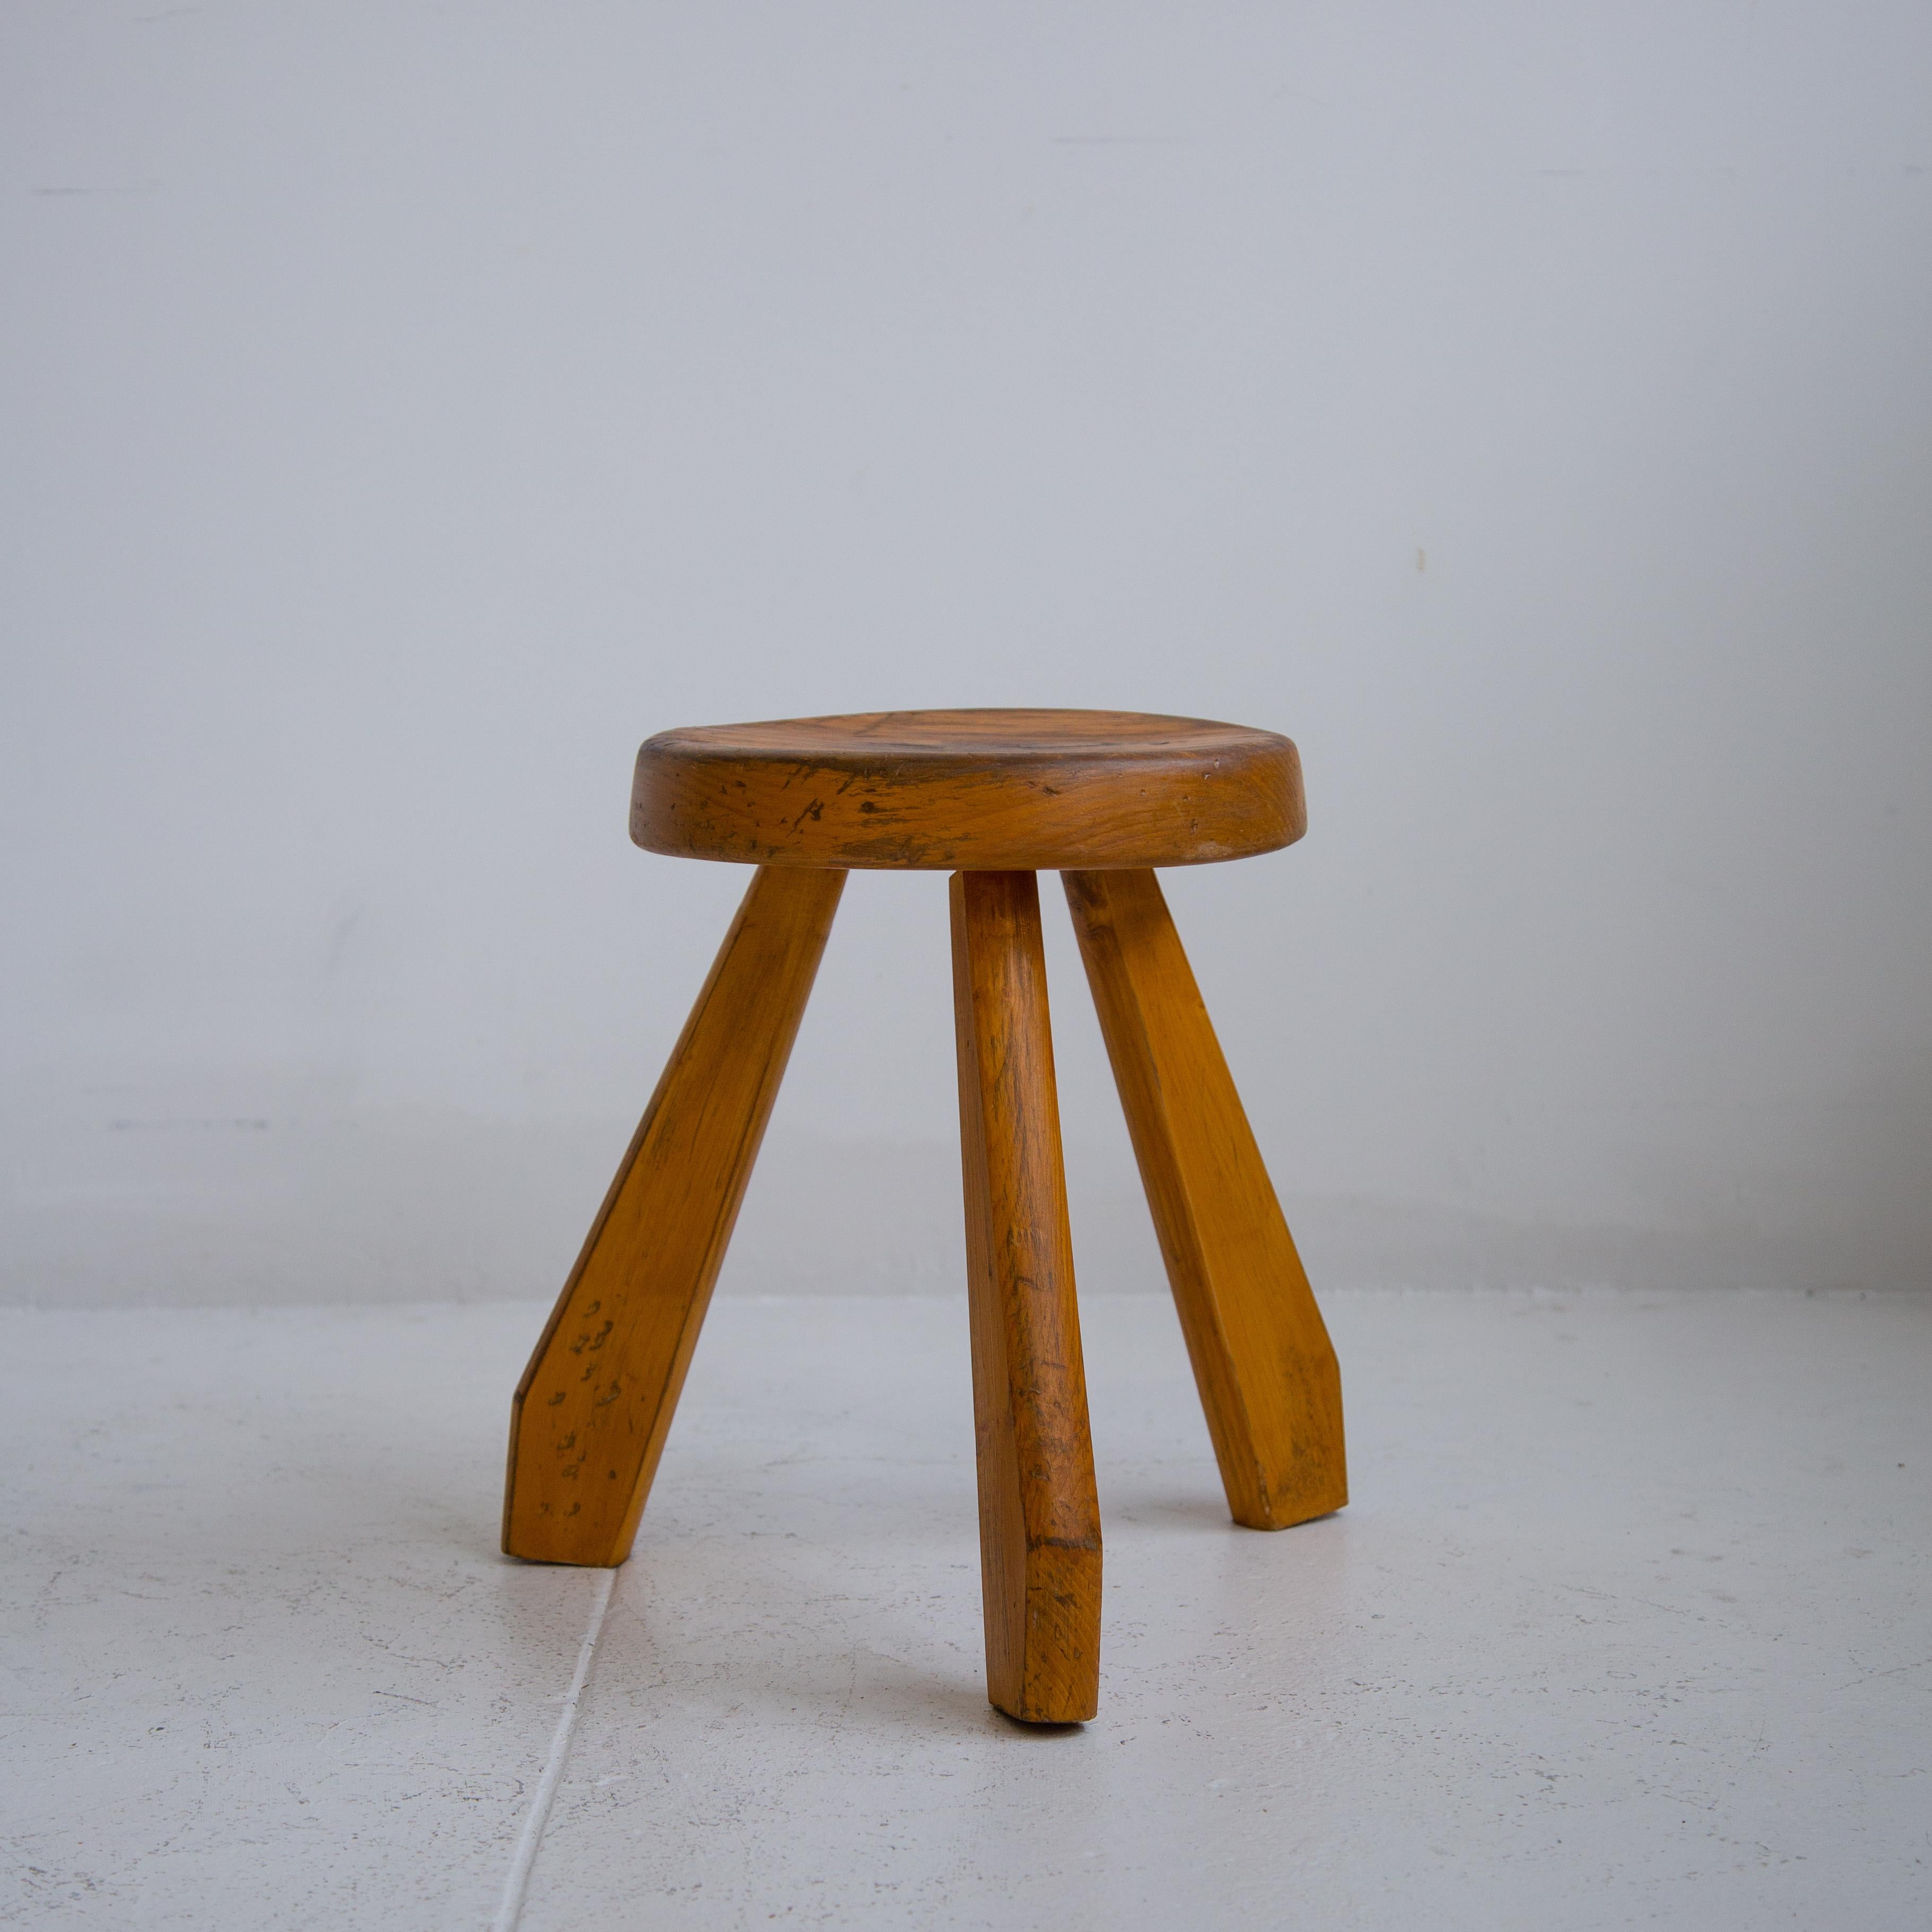 Iconic Les Arcs light pine tripod by Charlotte Perriand from France. Bulky legs supported by a curved seat, this stool is expressive of the French designer. Stool has a perfect patinated light pine, exceptional as an accent piece in any home.

 